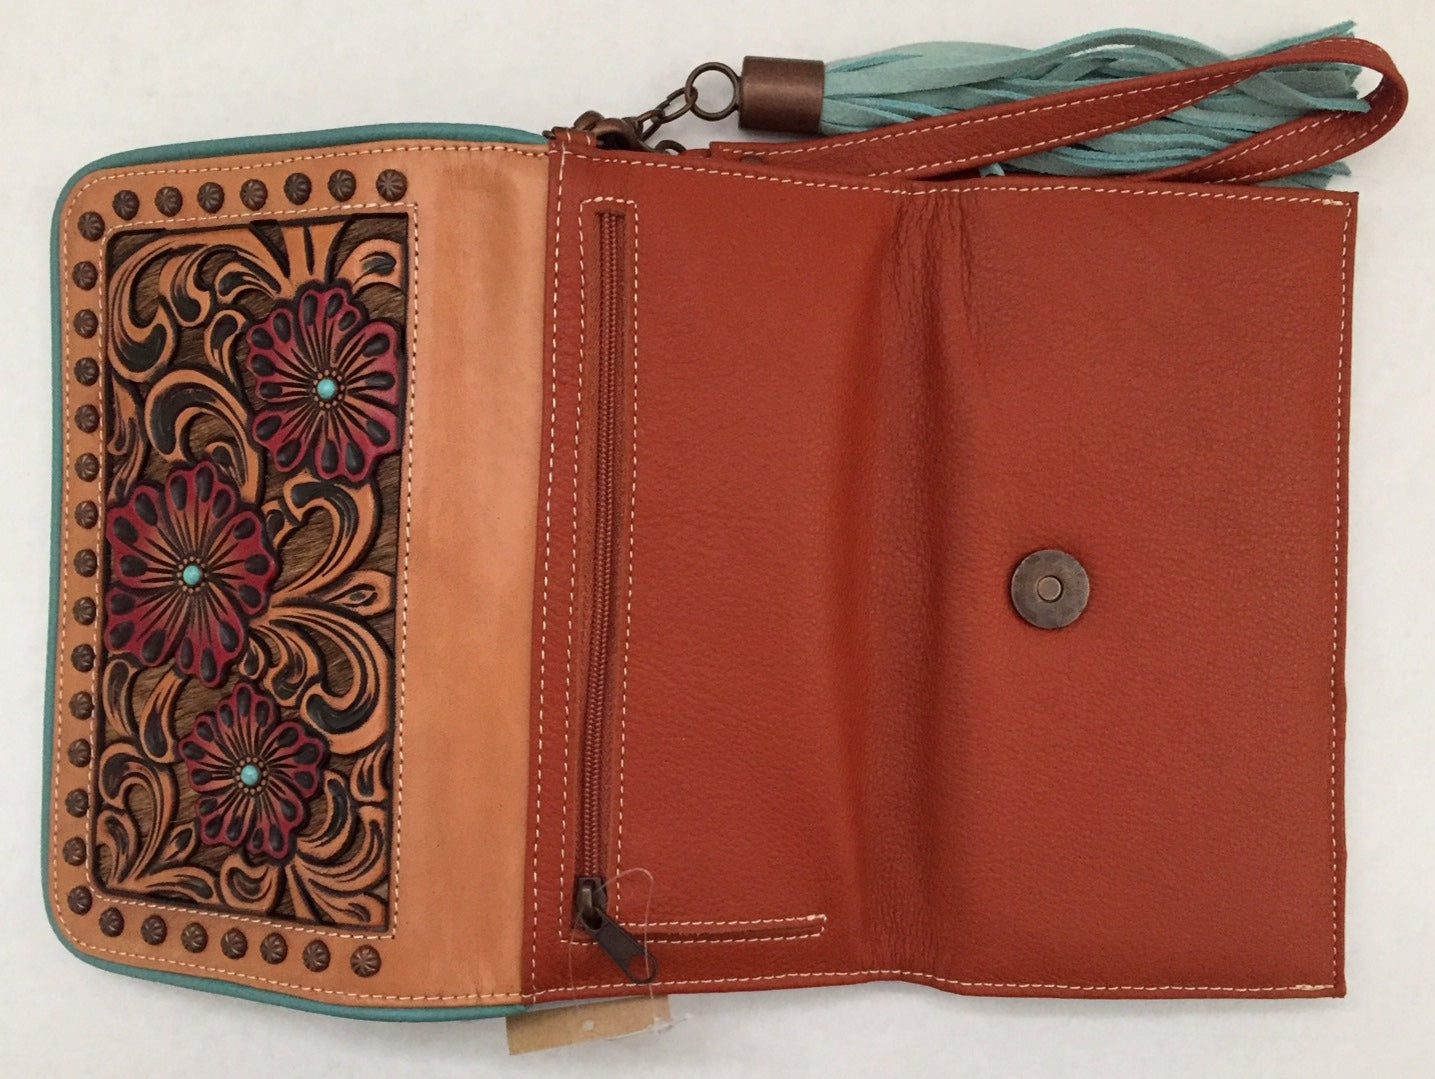 Women's Ariat GENUINE LEATHER CLUTCH WALLET w/ Floral tooling Calf hair